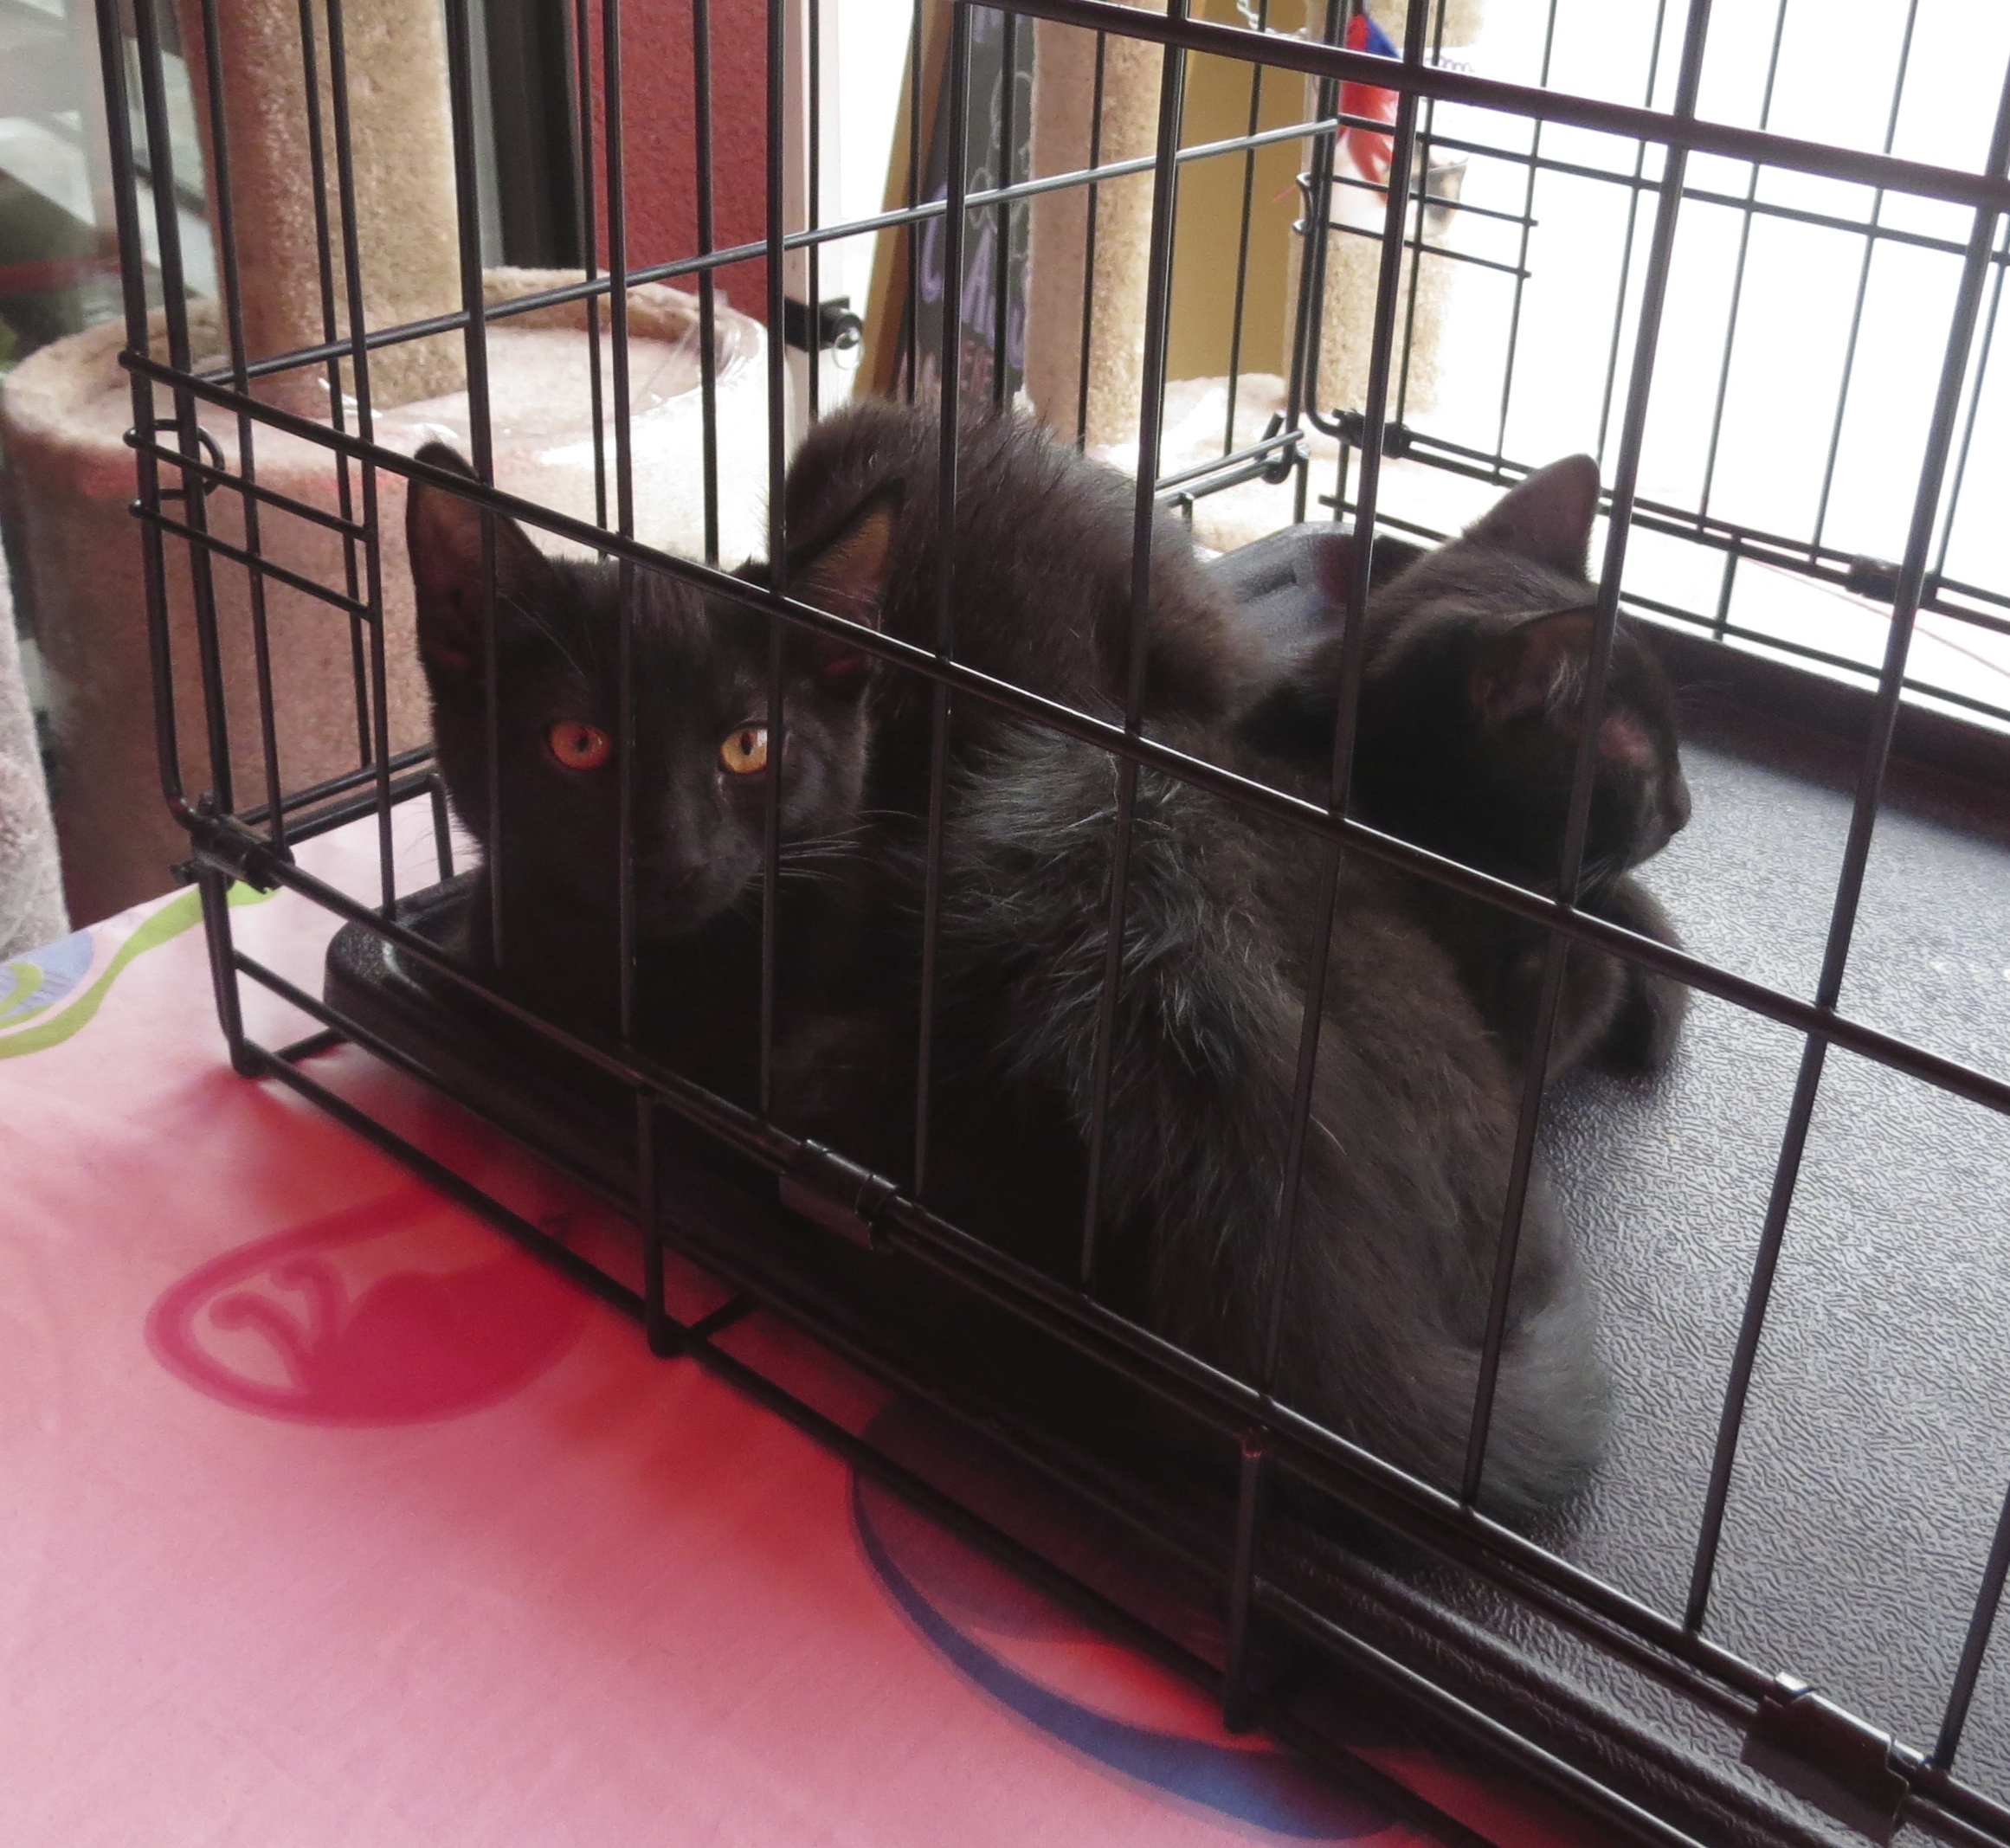 Two Black Kittens in a Cage